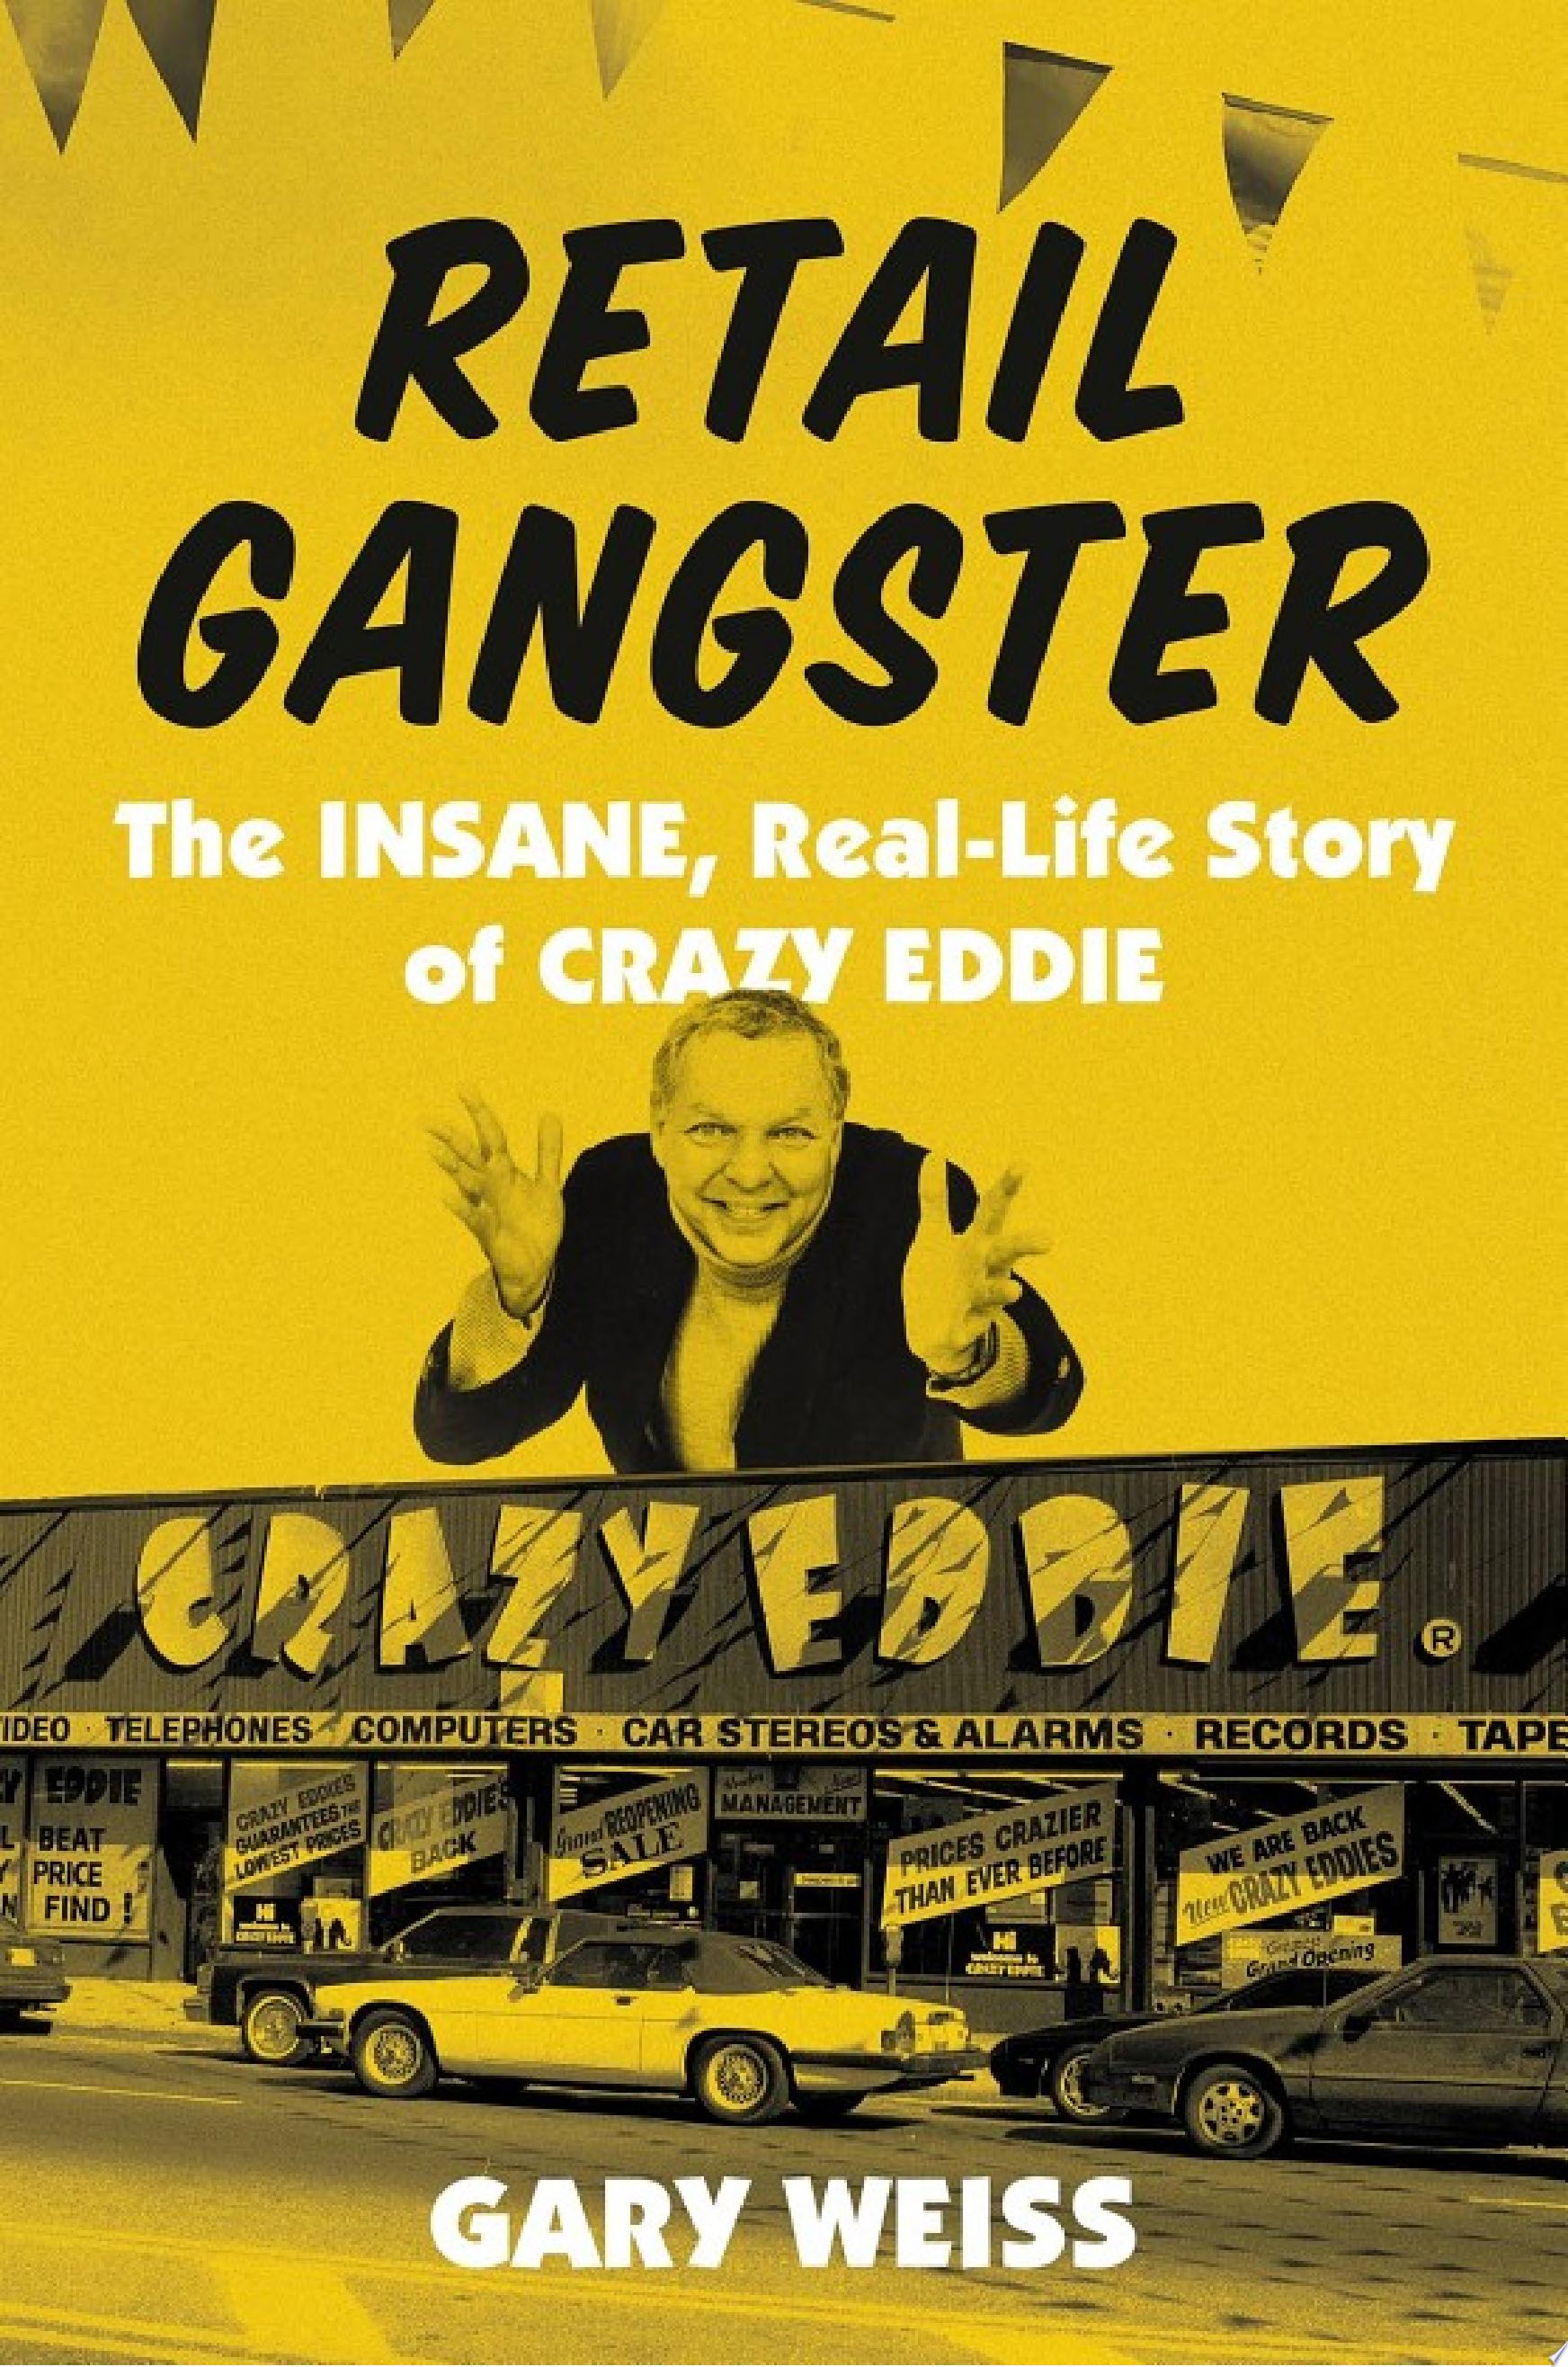 Image for "Retail Gangster"